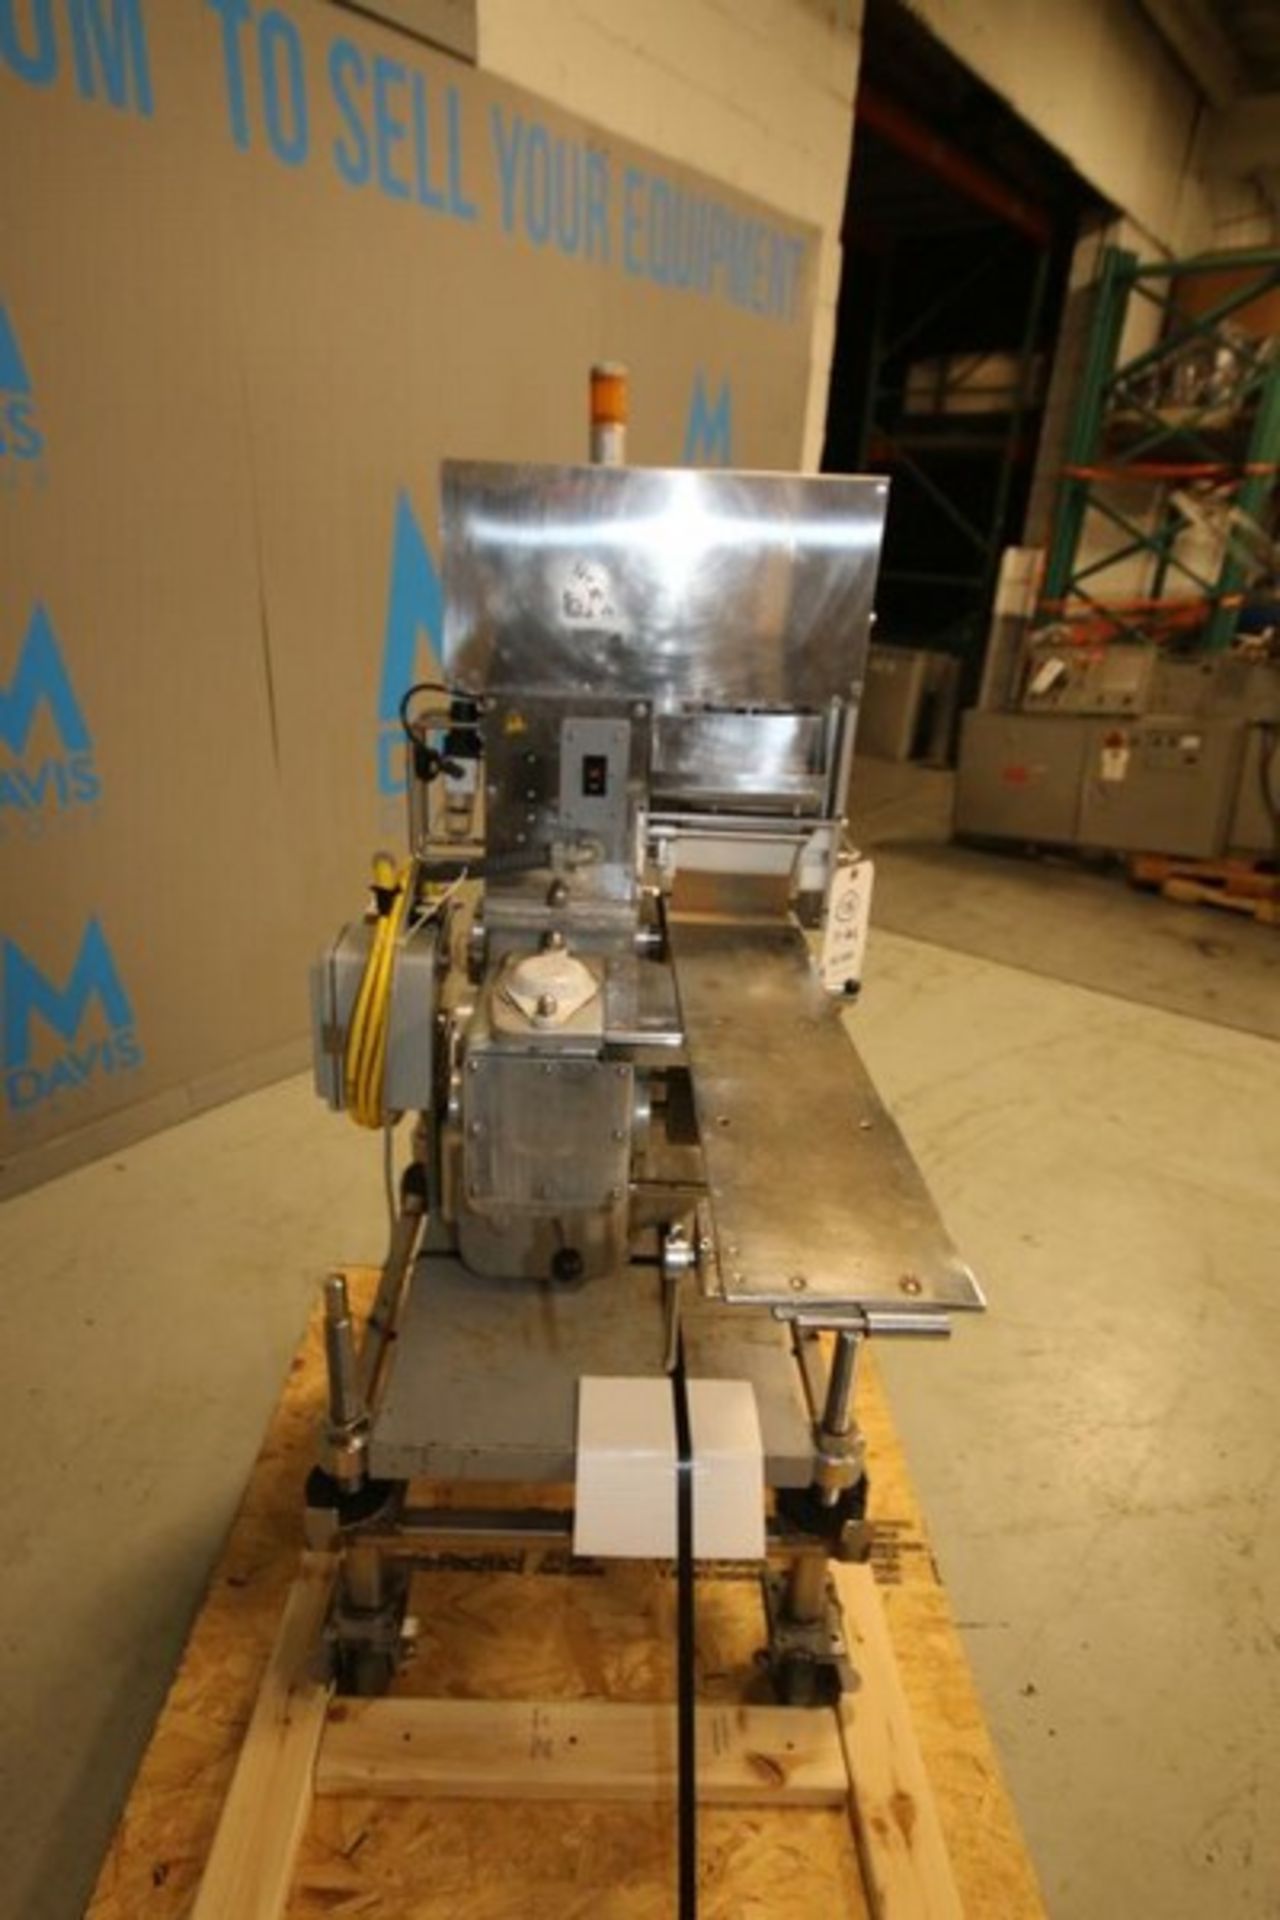 Rheon S/S Guillotine Style Vertical Cross Cutter,Model GK420, SN396, with 5.5 " Length Knife, Aprox. - Image 3 of 8